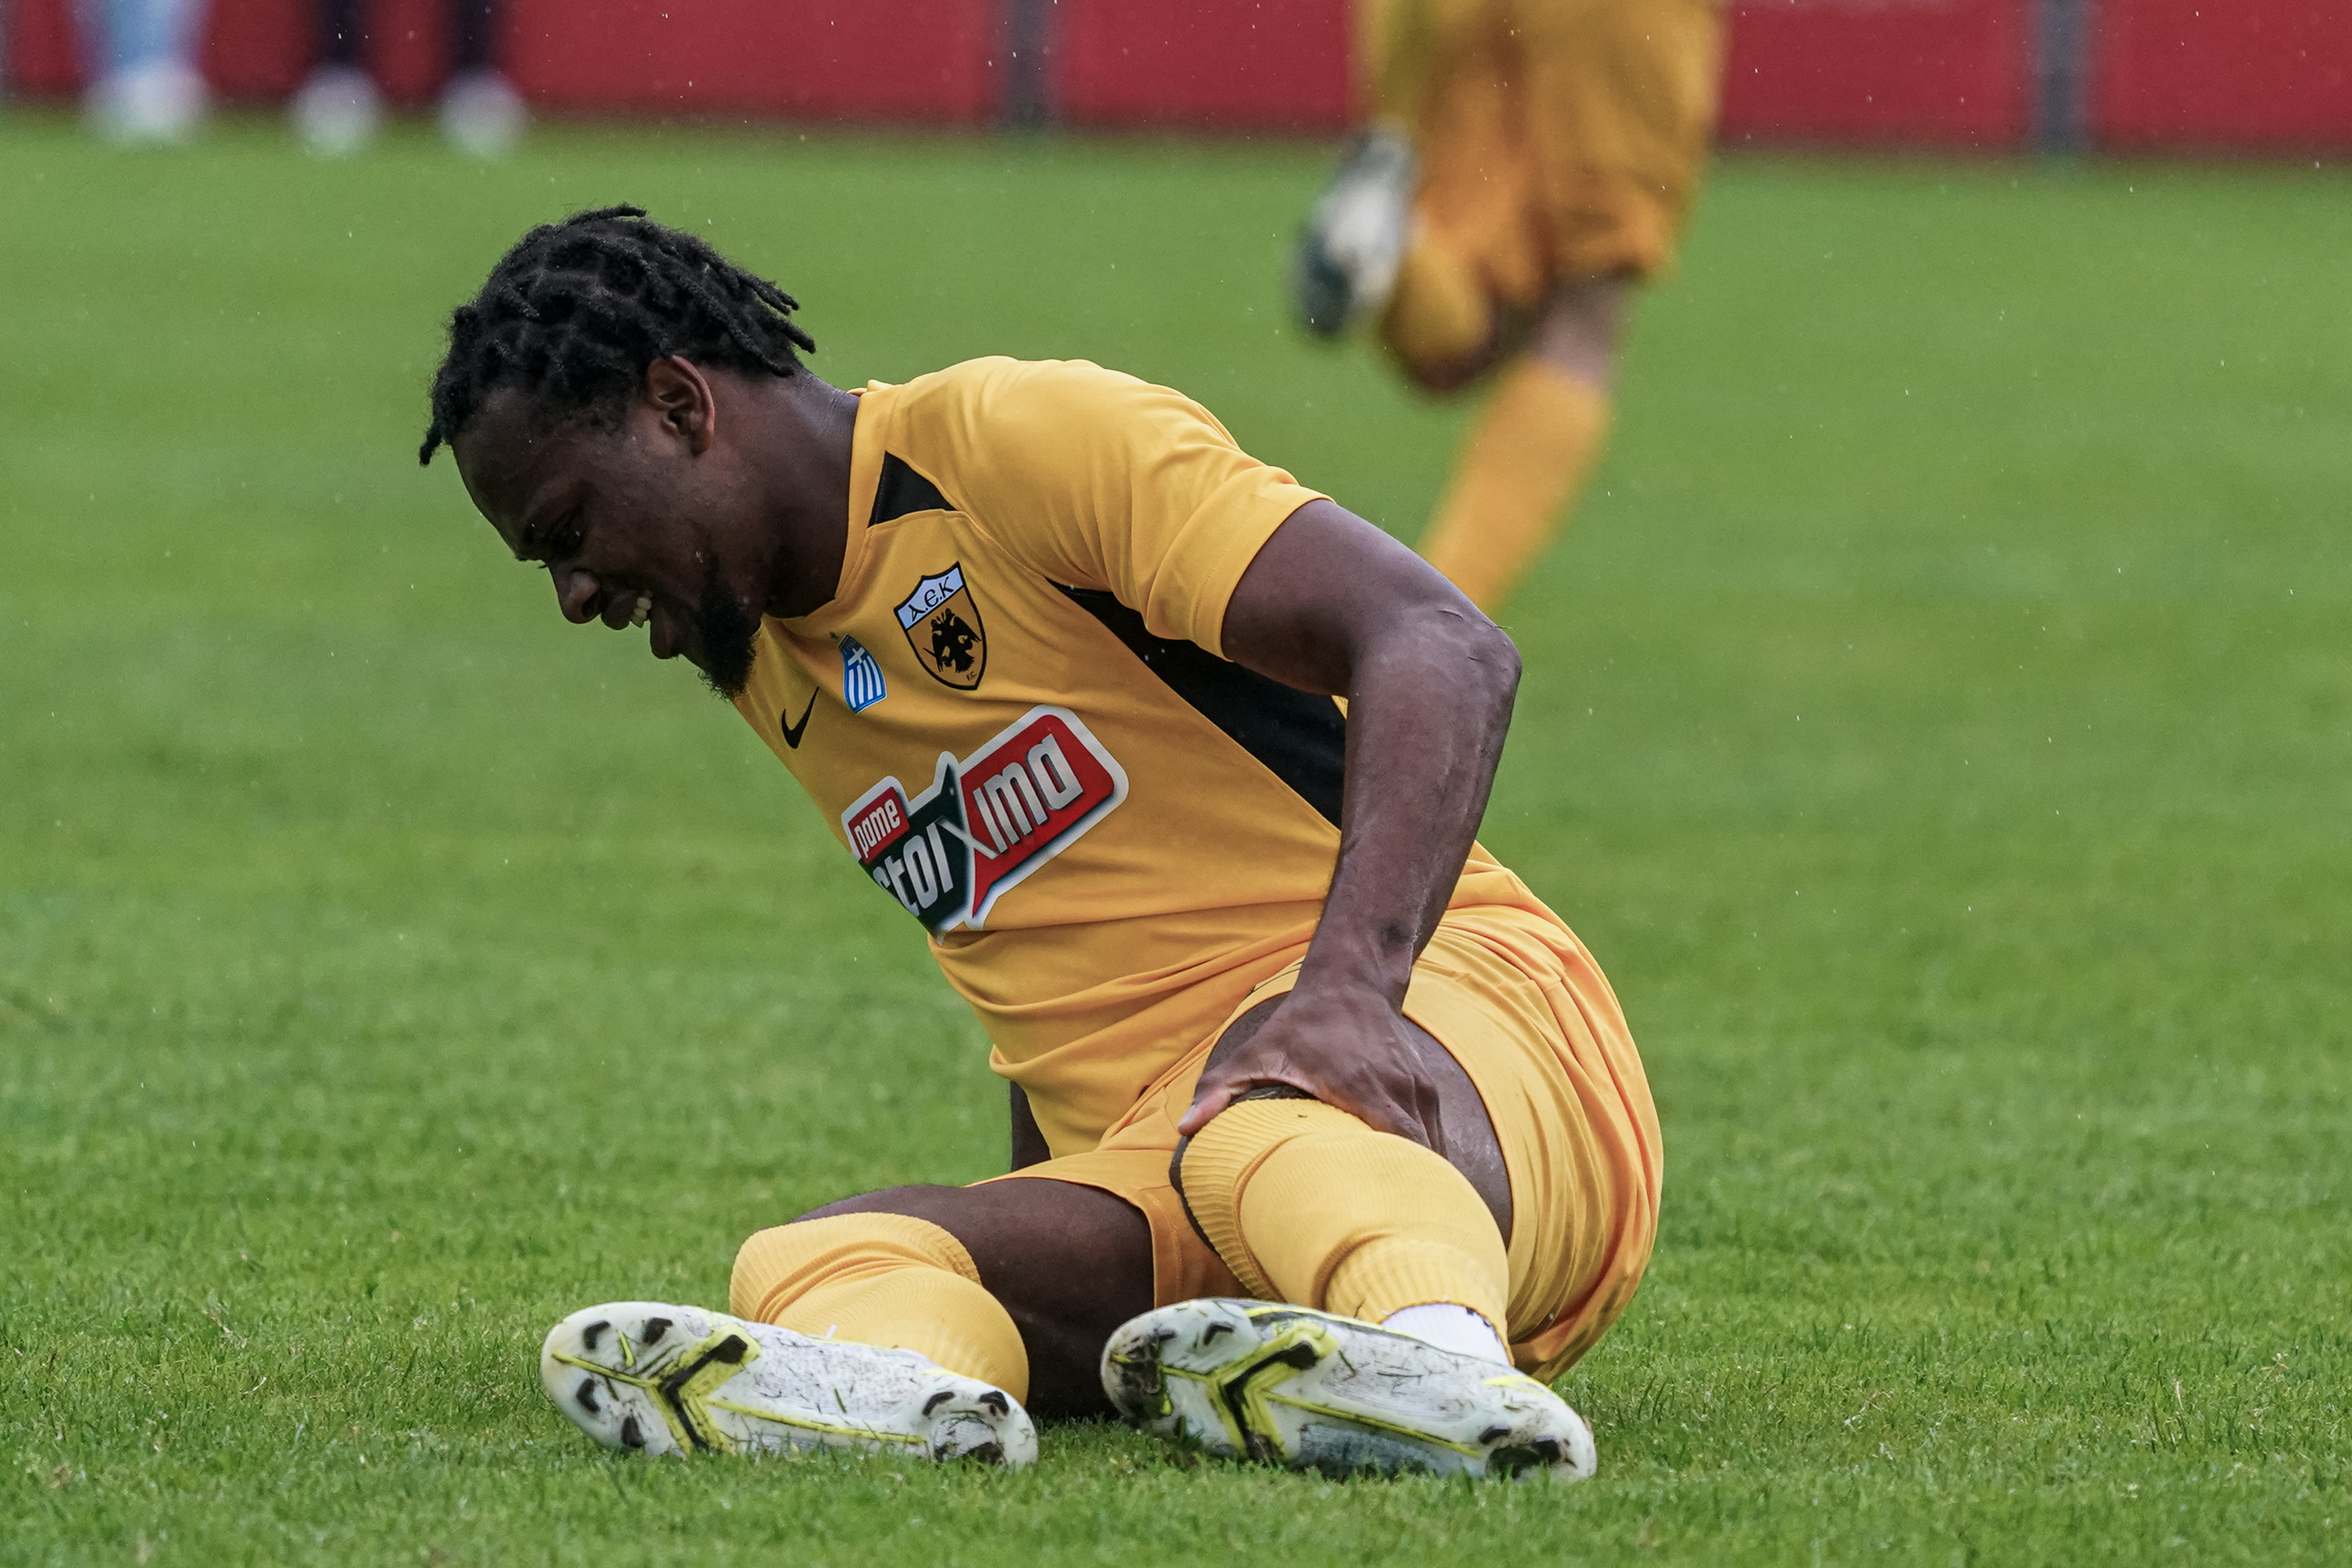 03-07-2021 Voetbal PSV v RWD Molenbeek EindhovenGILZERIJEN, NETHERLANDS - JULY 6: Levi Garcia of AEK Athens lays on the ground injured during the friendly match between Royal Antwerp FC and AEK Athene at Sportpark Verhoven on July 6, 2021 in Gilzerijen, Netherlands (Photo by Jeroen Meeuwsen/Orange Pictures)